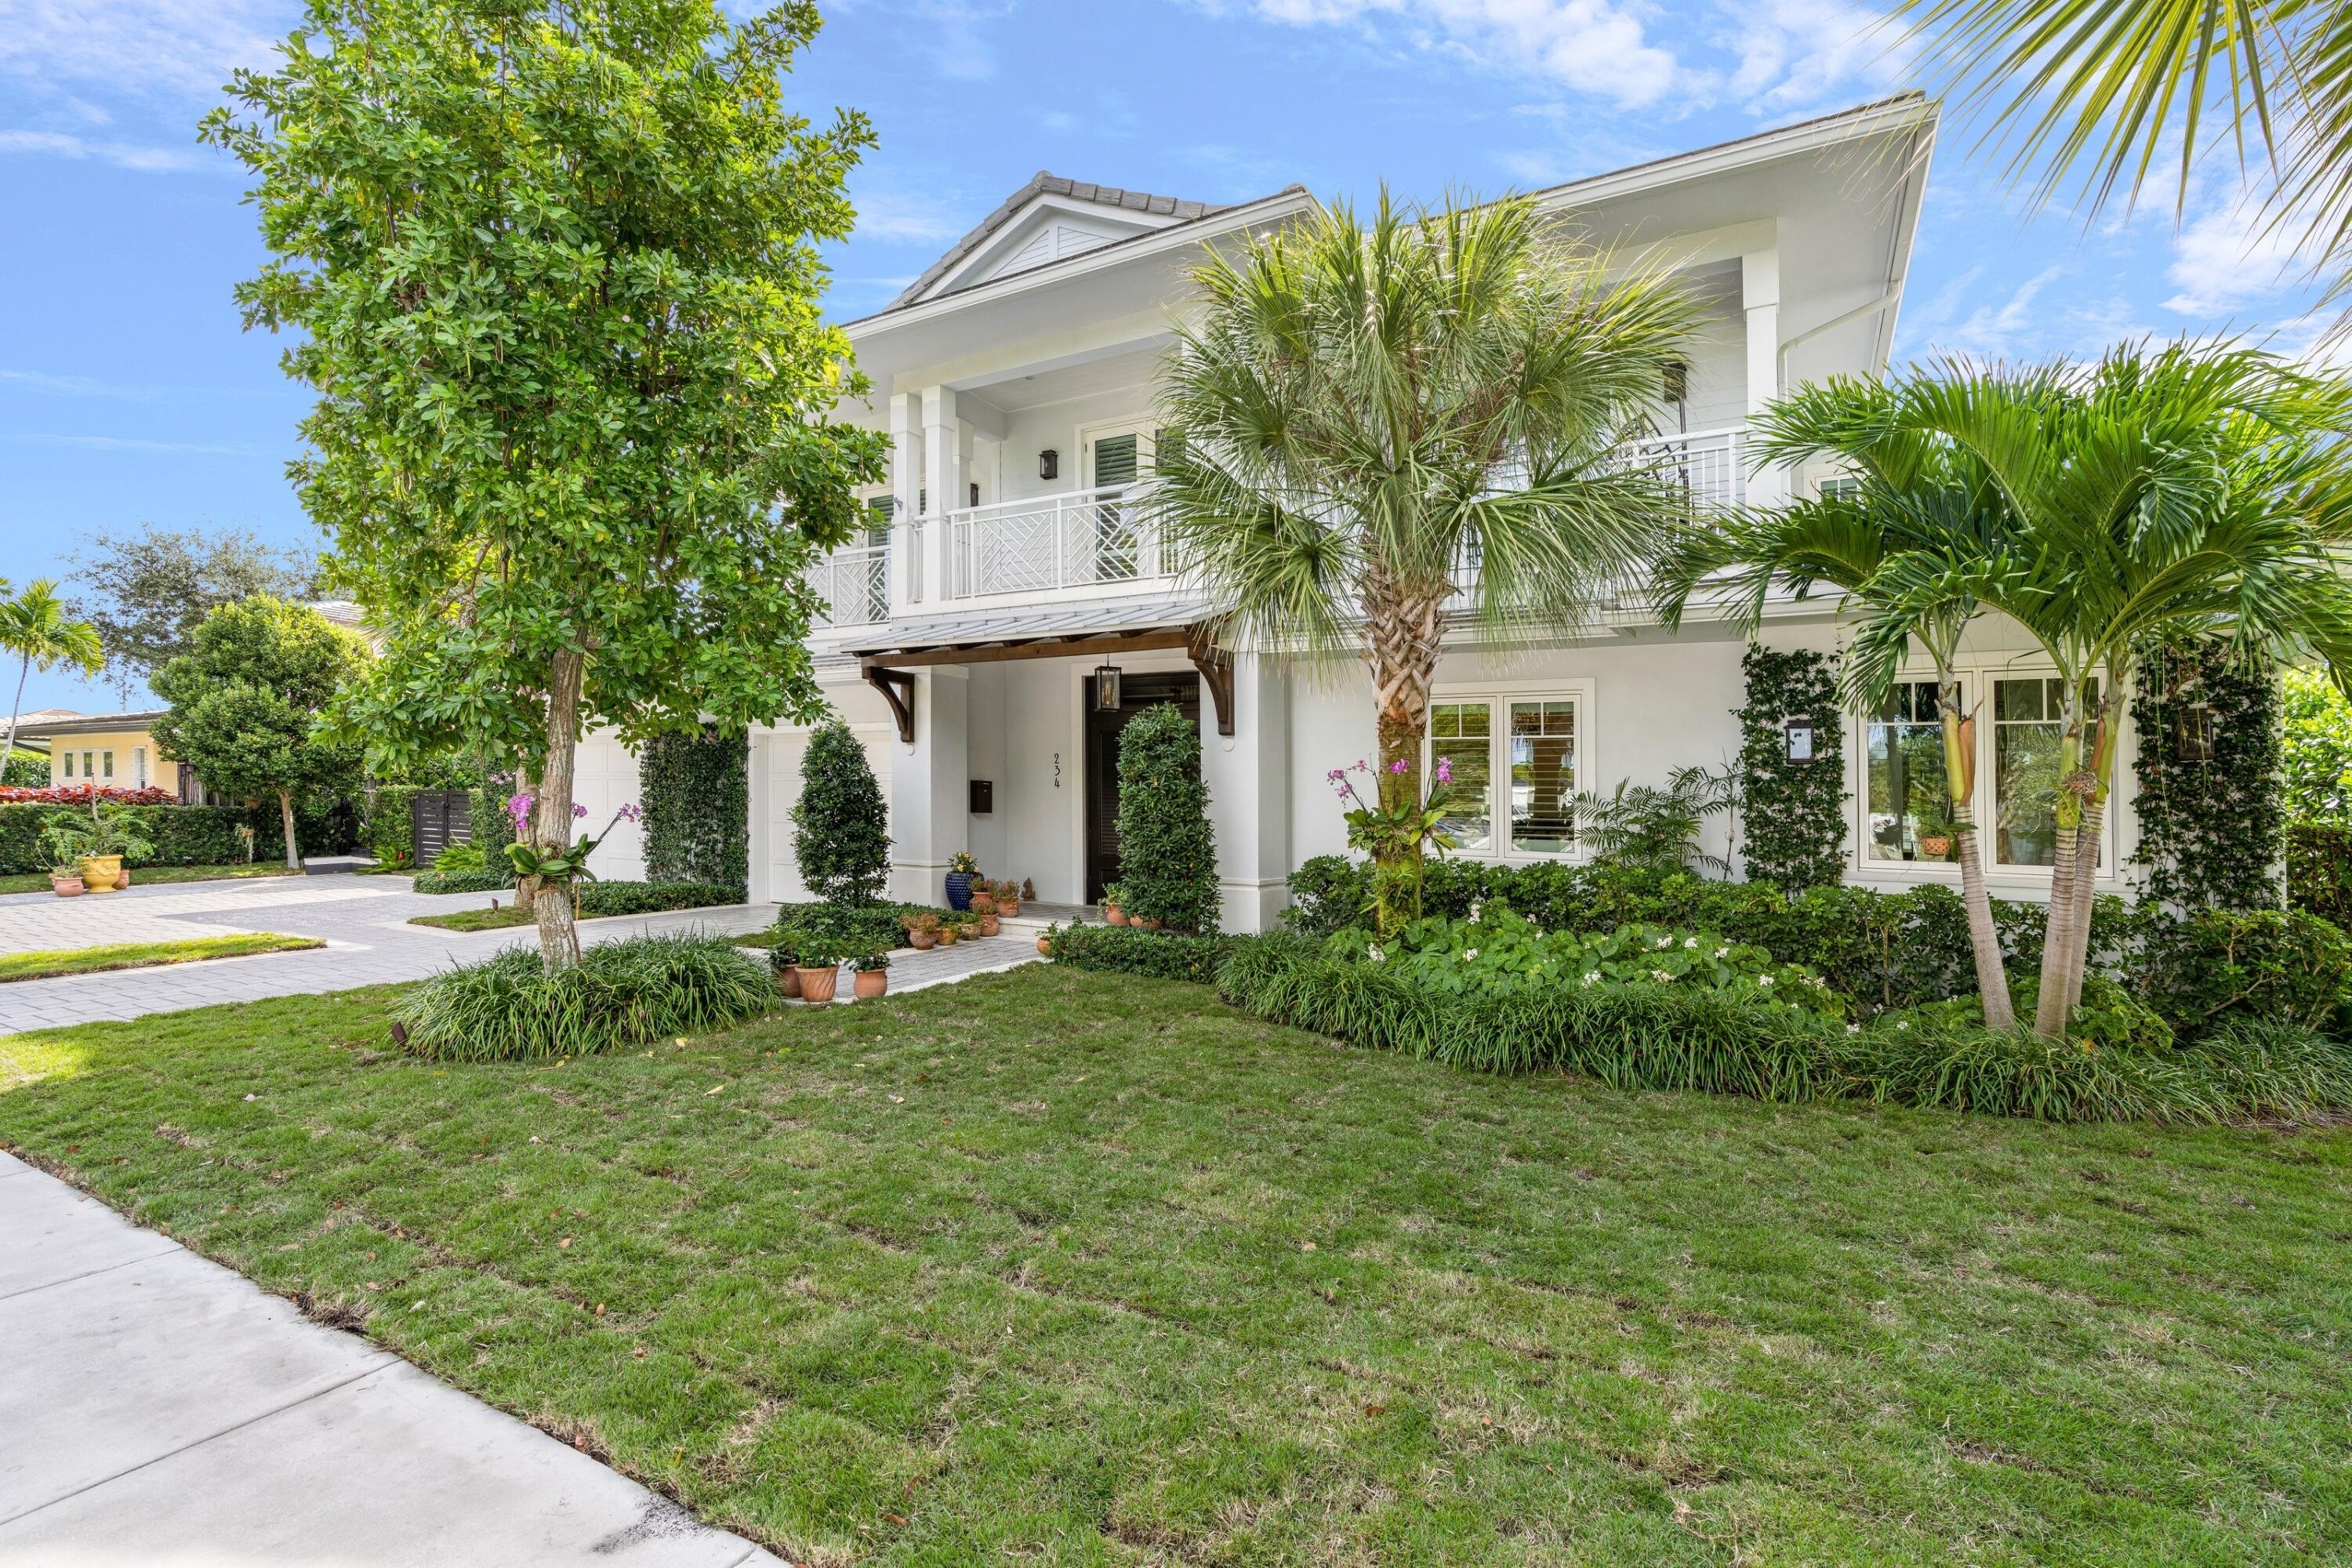 Single Family Home at West Palm Beach